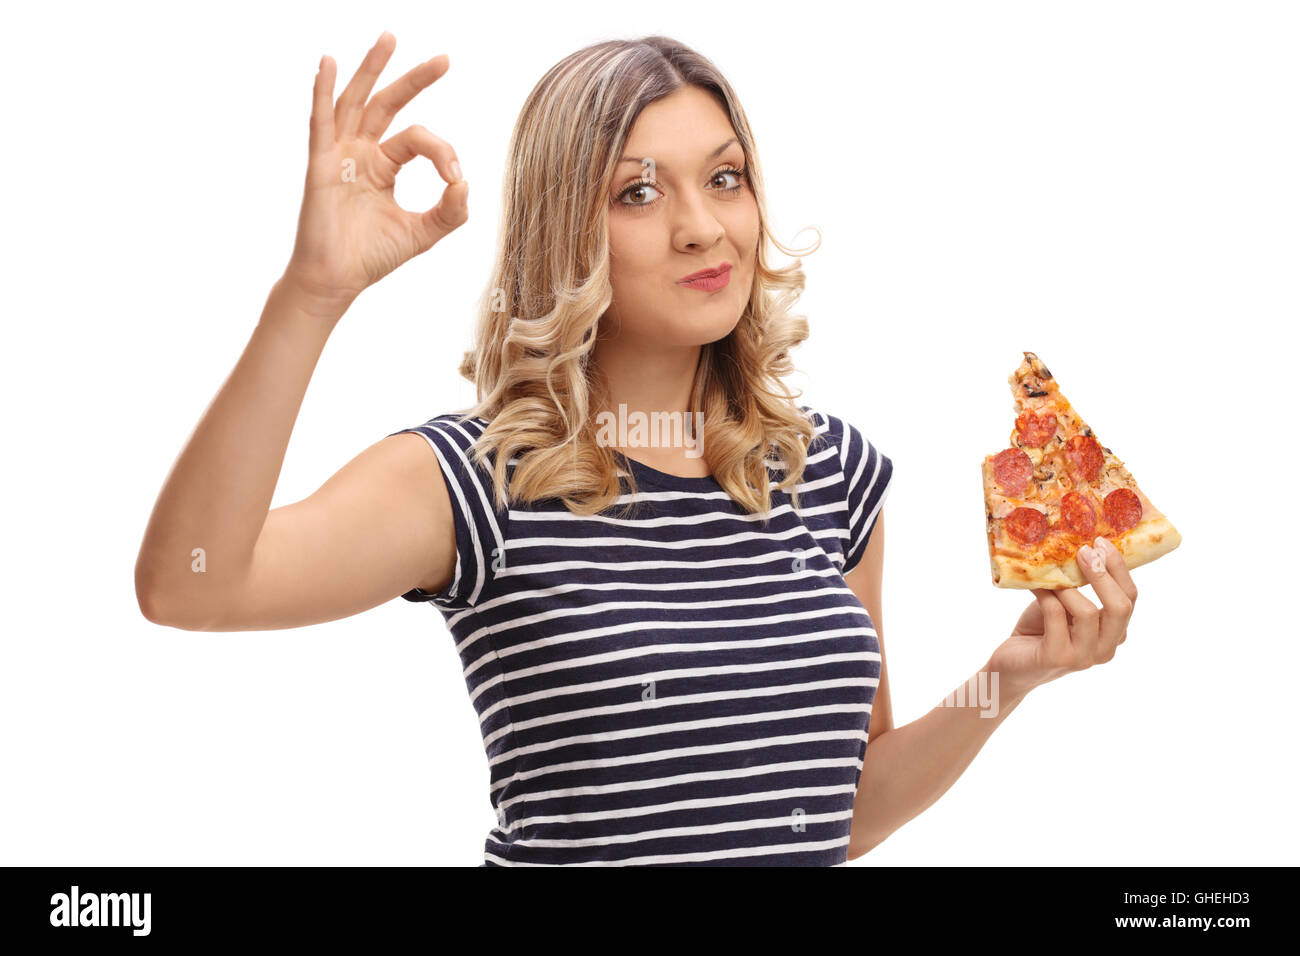 Young blond woman eating a slice of pizza and making an ok gesture with her hand isolated on white background Stock Photo